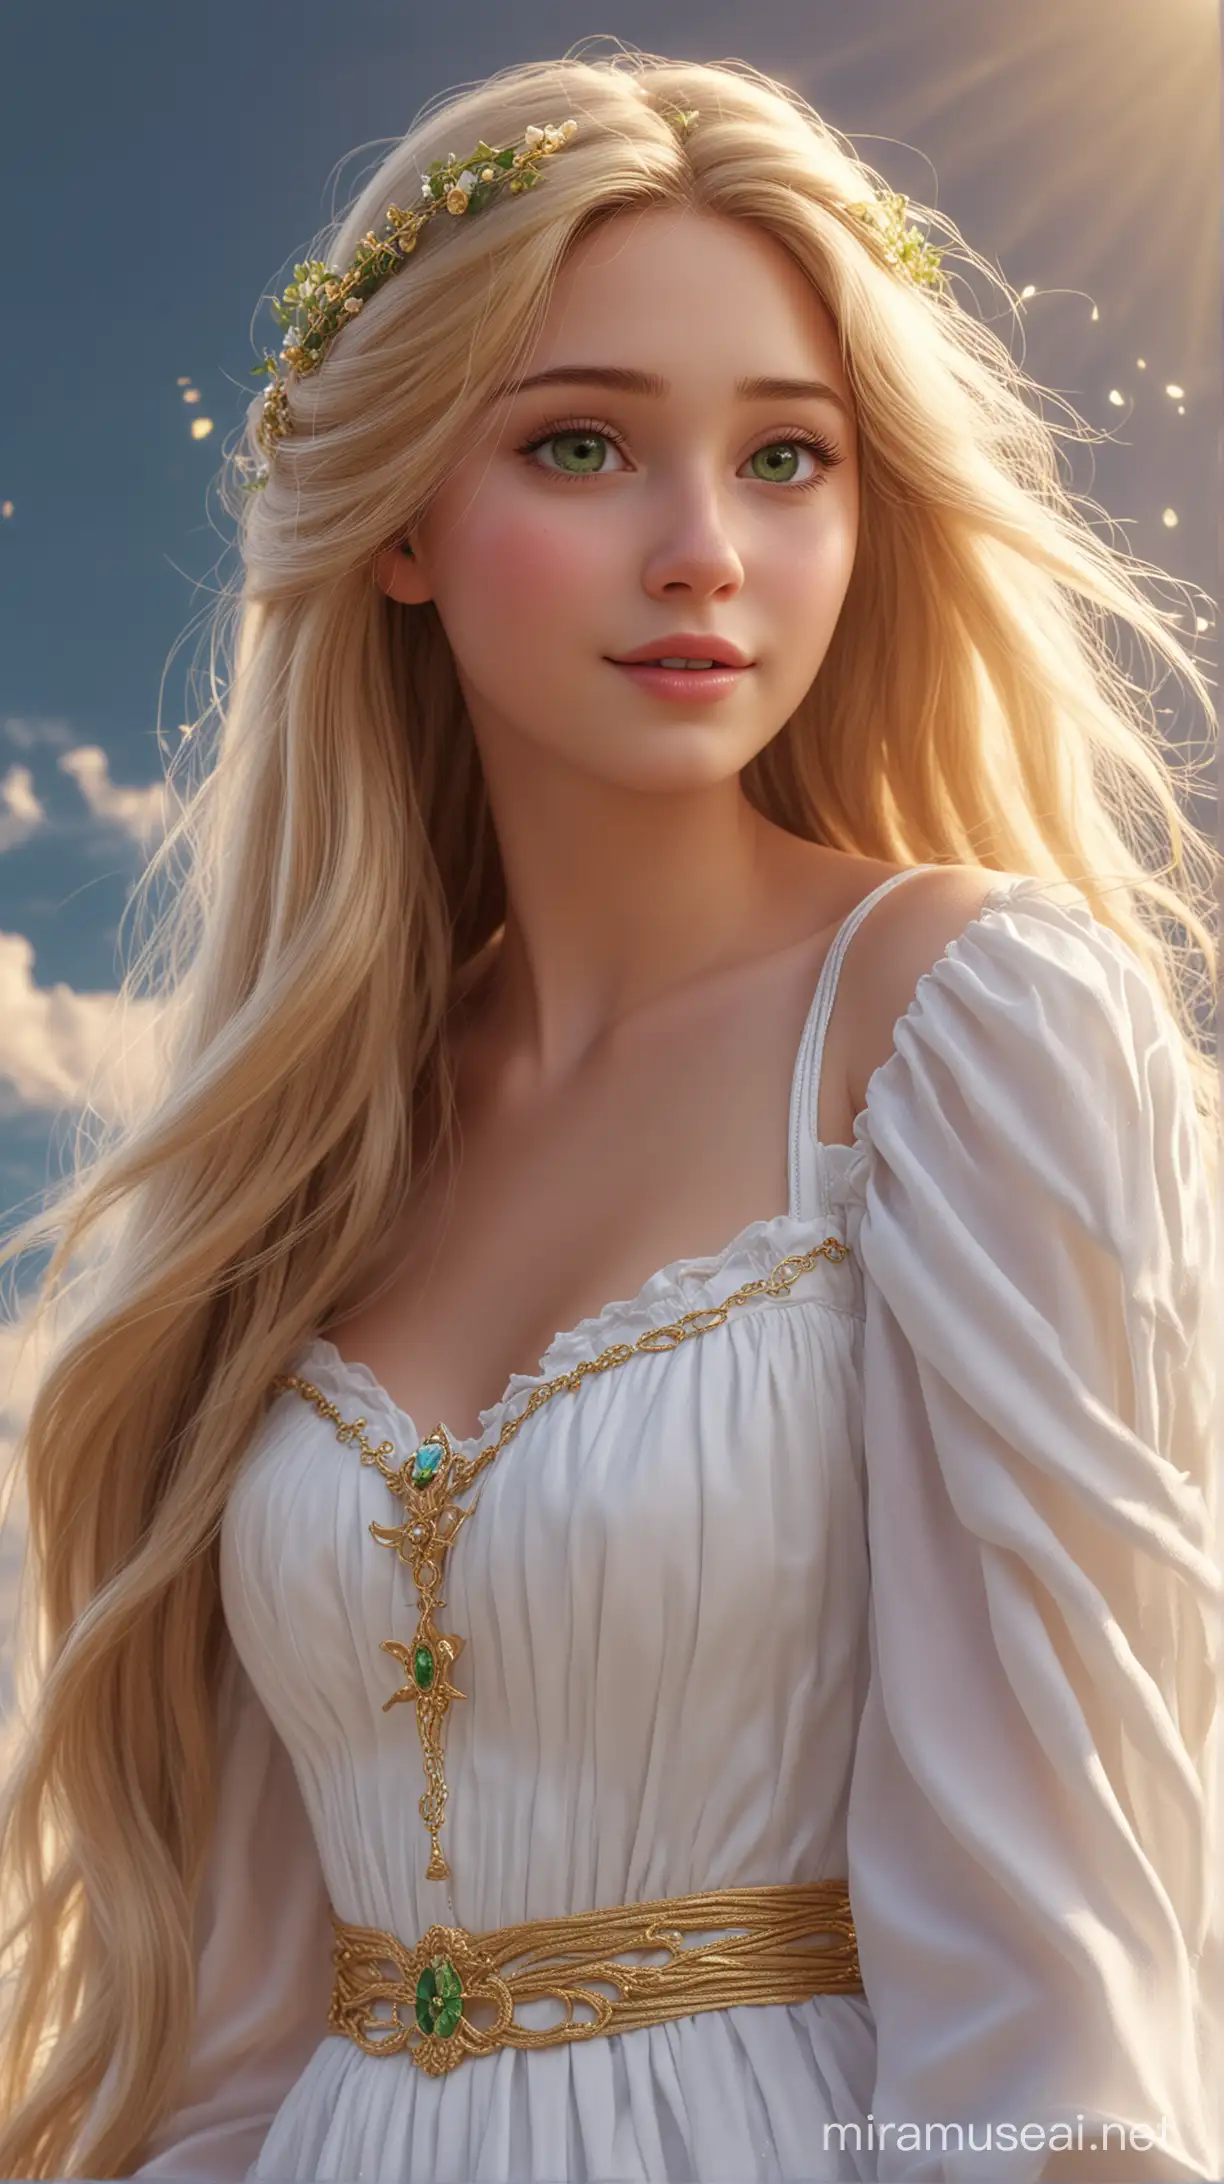 in the sky natural background an angel flies to heaven there are disney princess Rapunzel
German 18-years and very very long blonde hair and green eyes and celestial white dress and with large white angel wings and face beautiful 8k re solution ultra-realisti